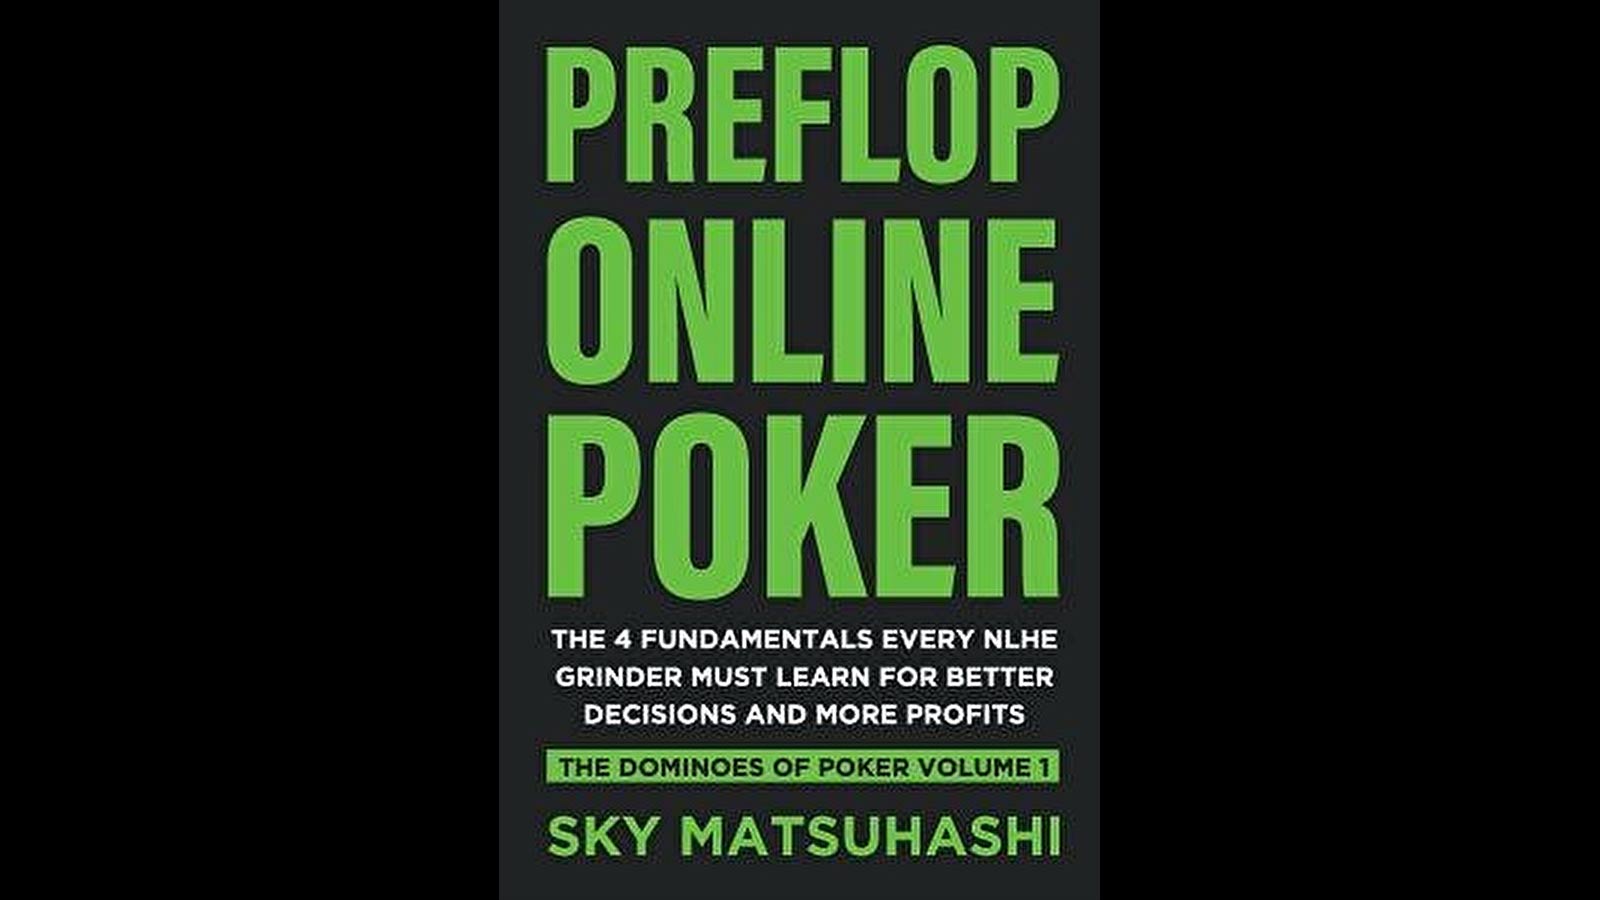 Preflop Online Poker The 4 Fundamentals Every Nlhe Grinder Must Learn for Better Decisions and More Profits